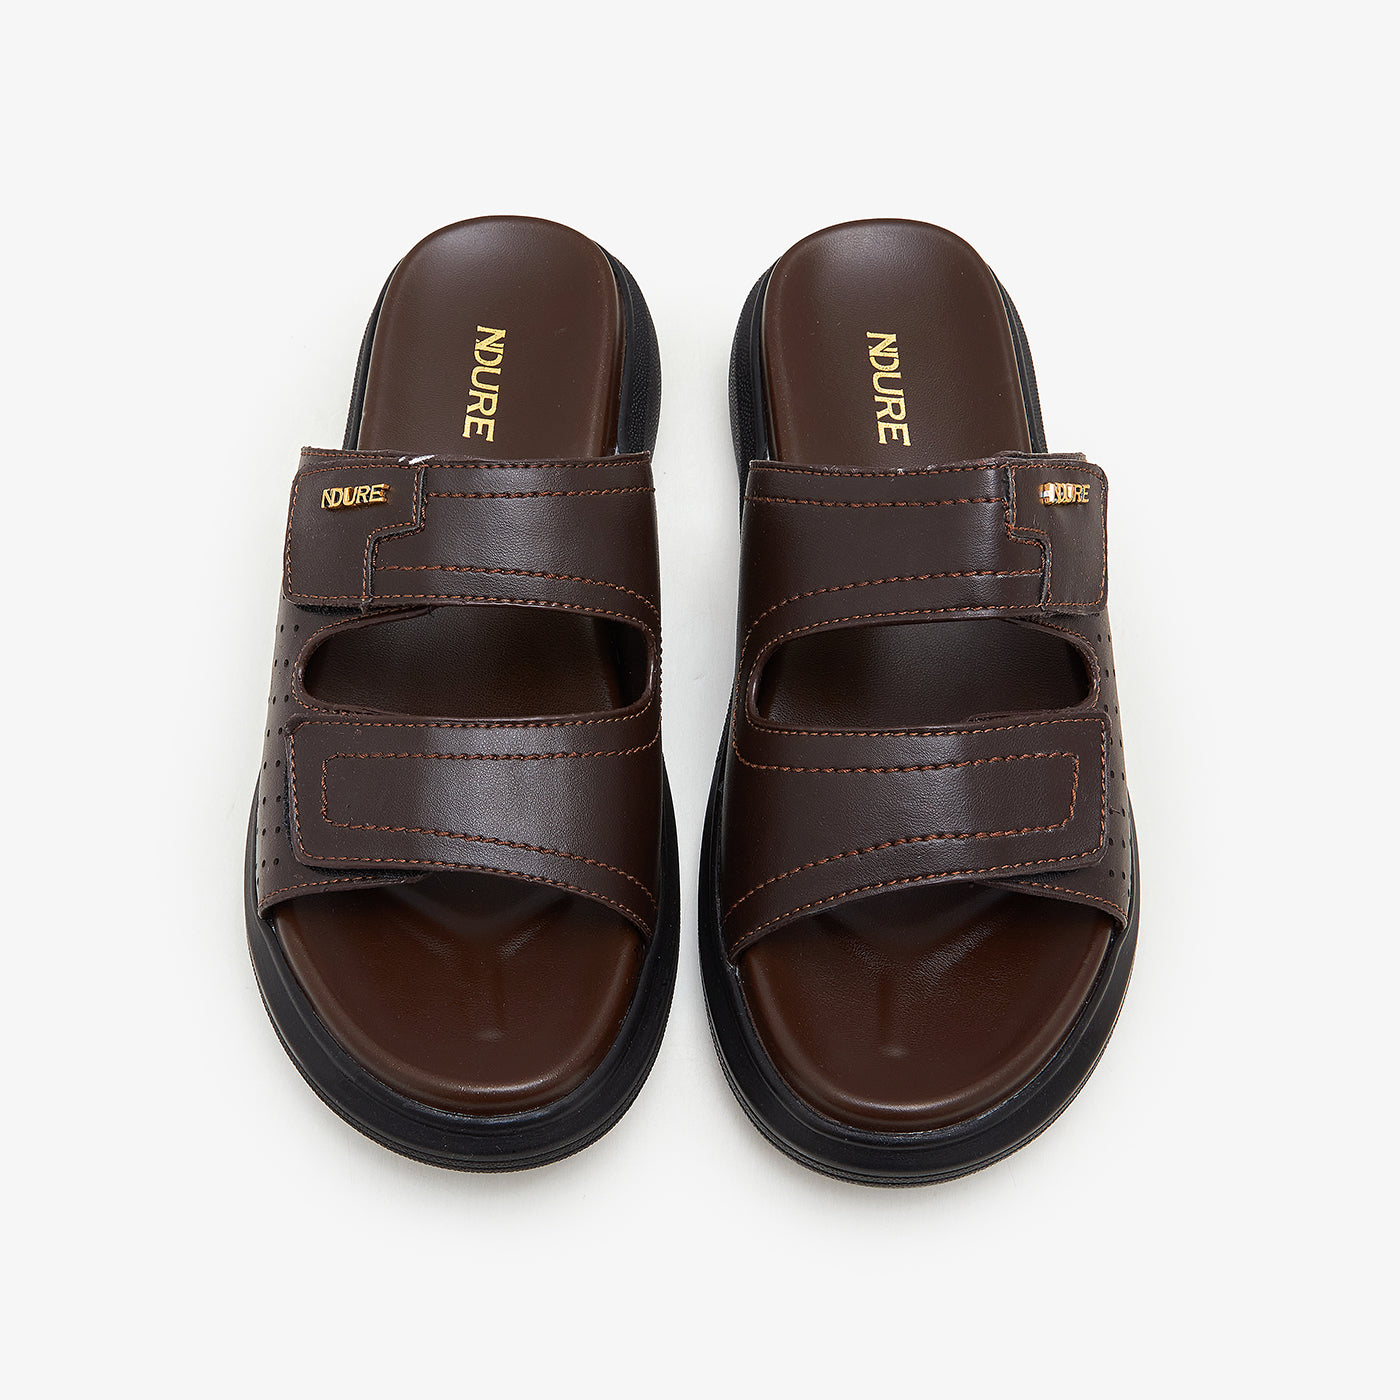 Men's Relaxed Fit Chappals